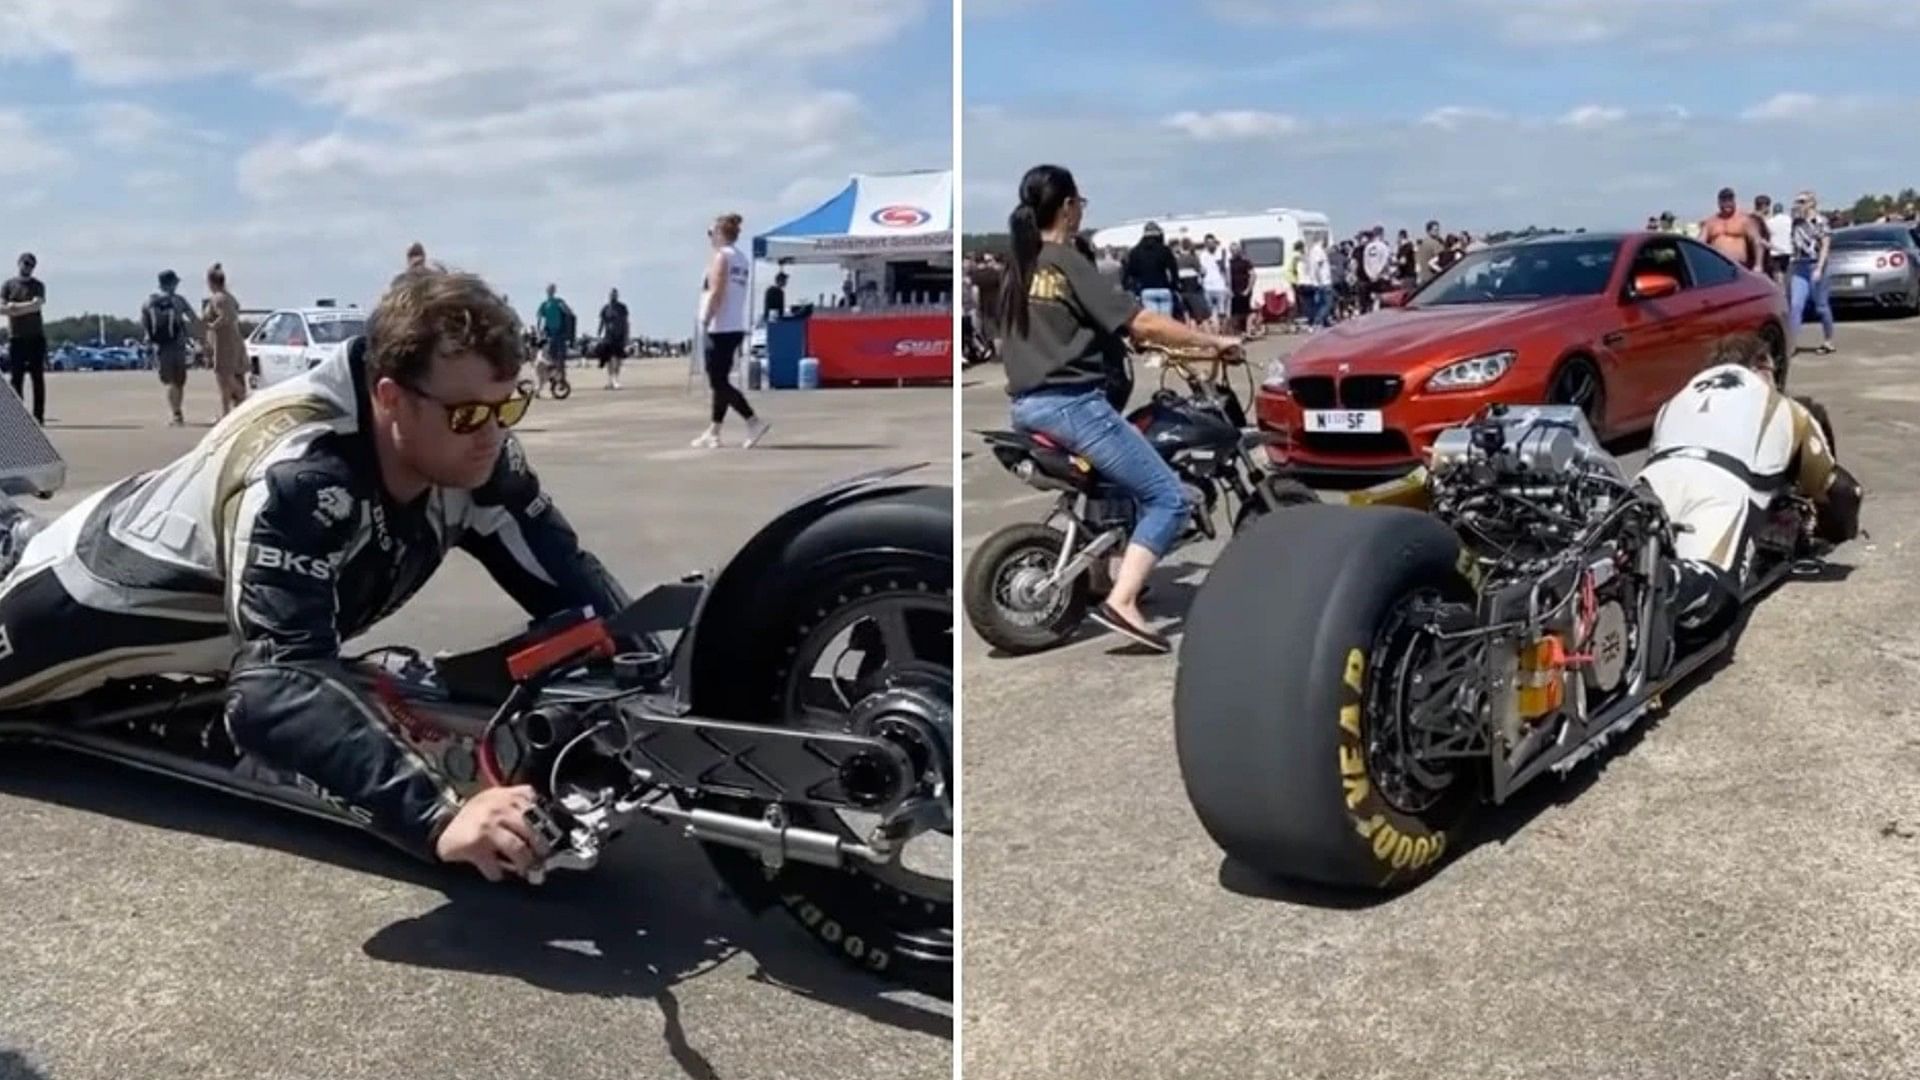 Unique Bike this bike has to be driven lying down video is going viral on social media